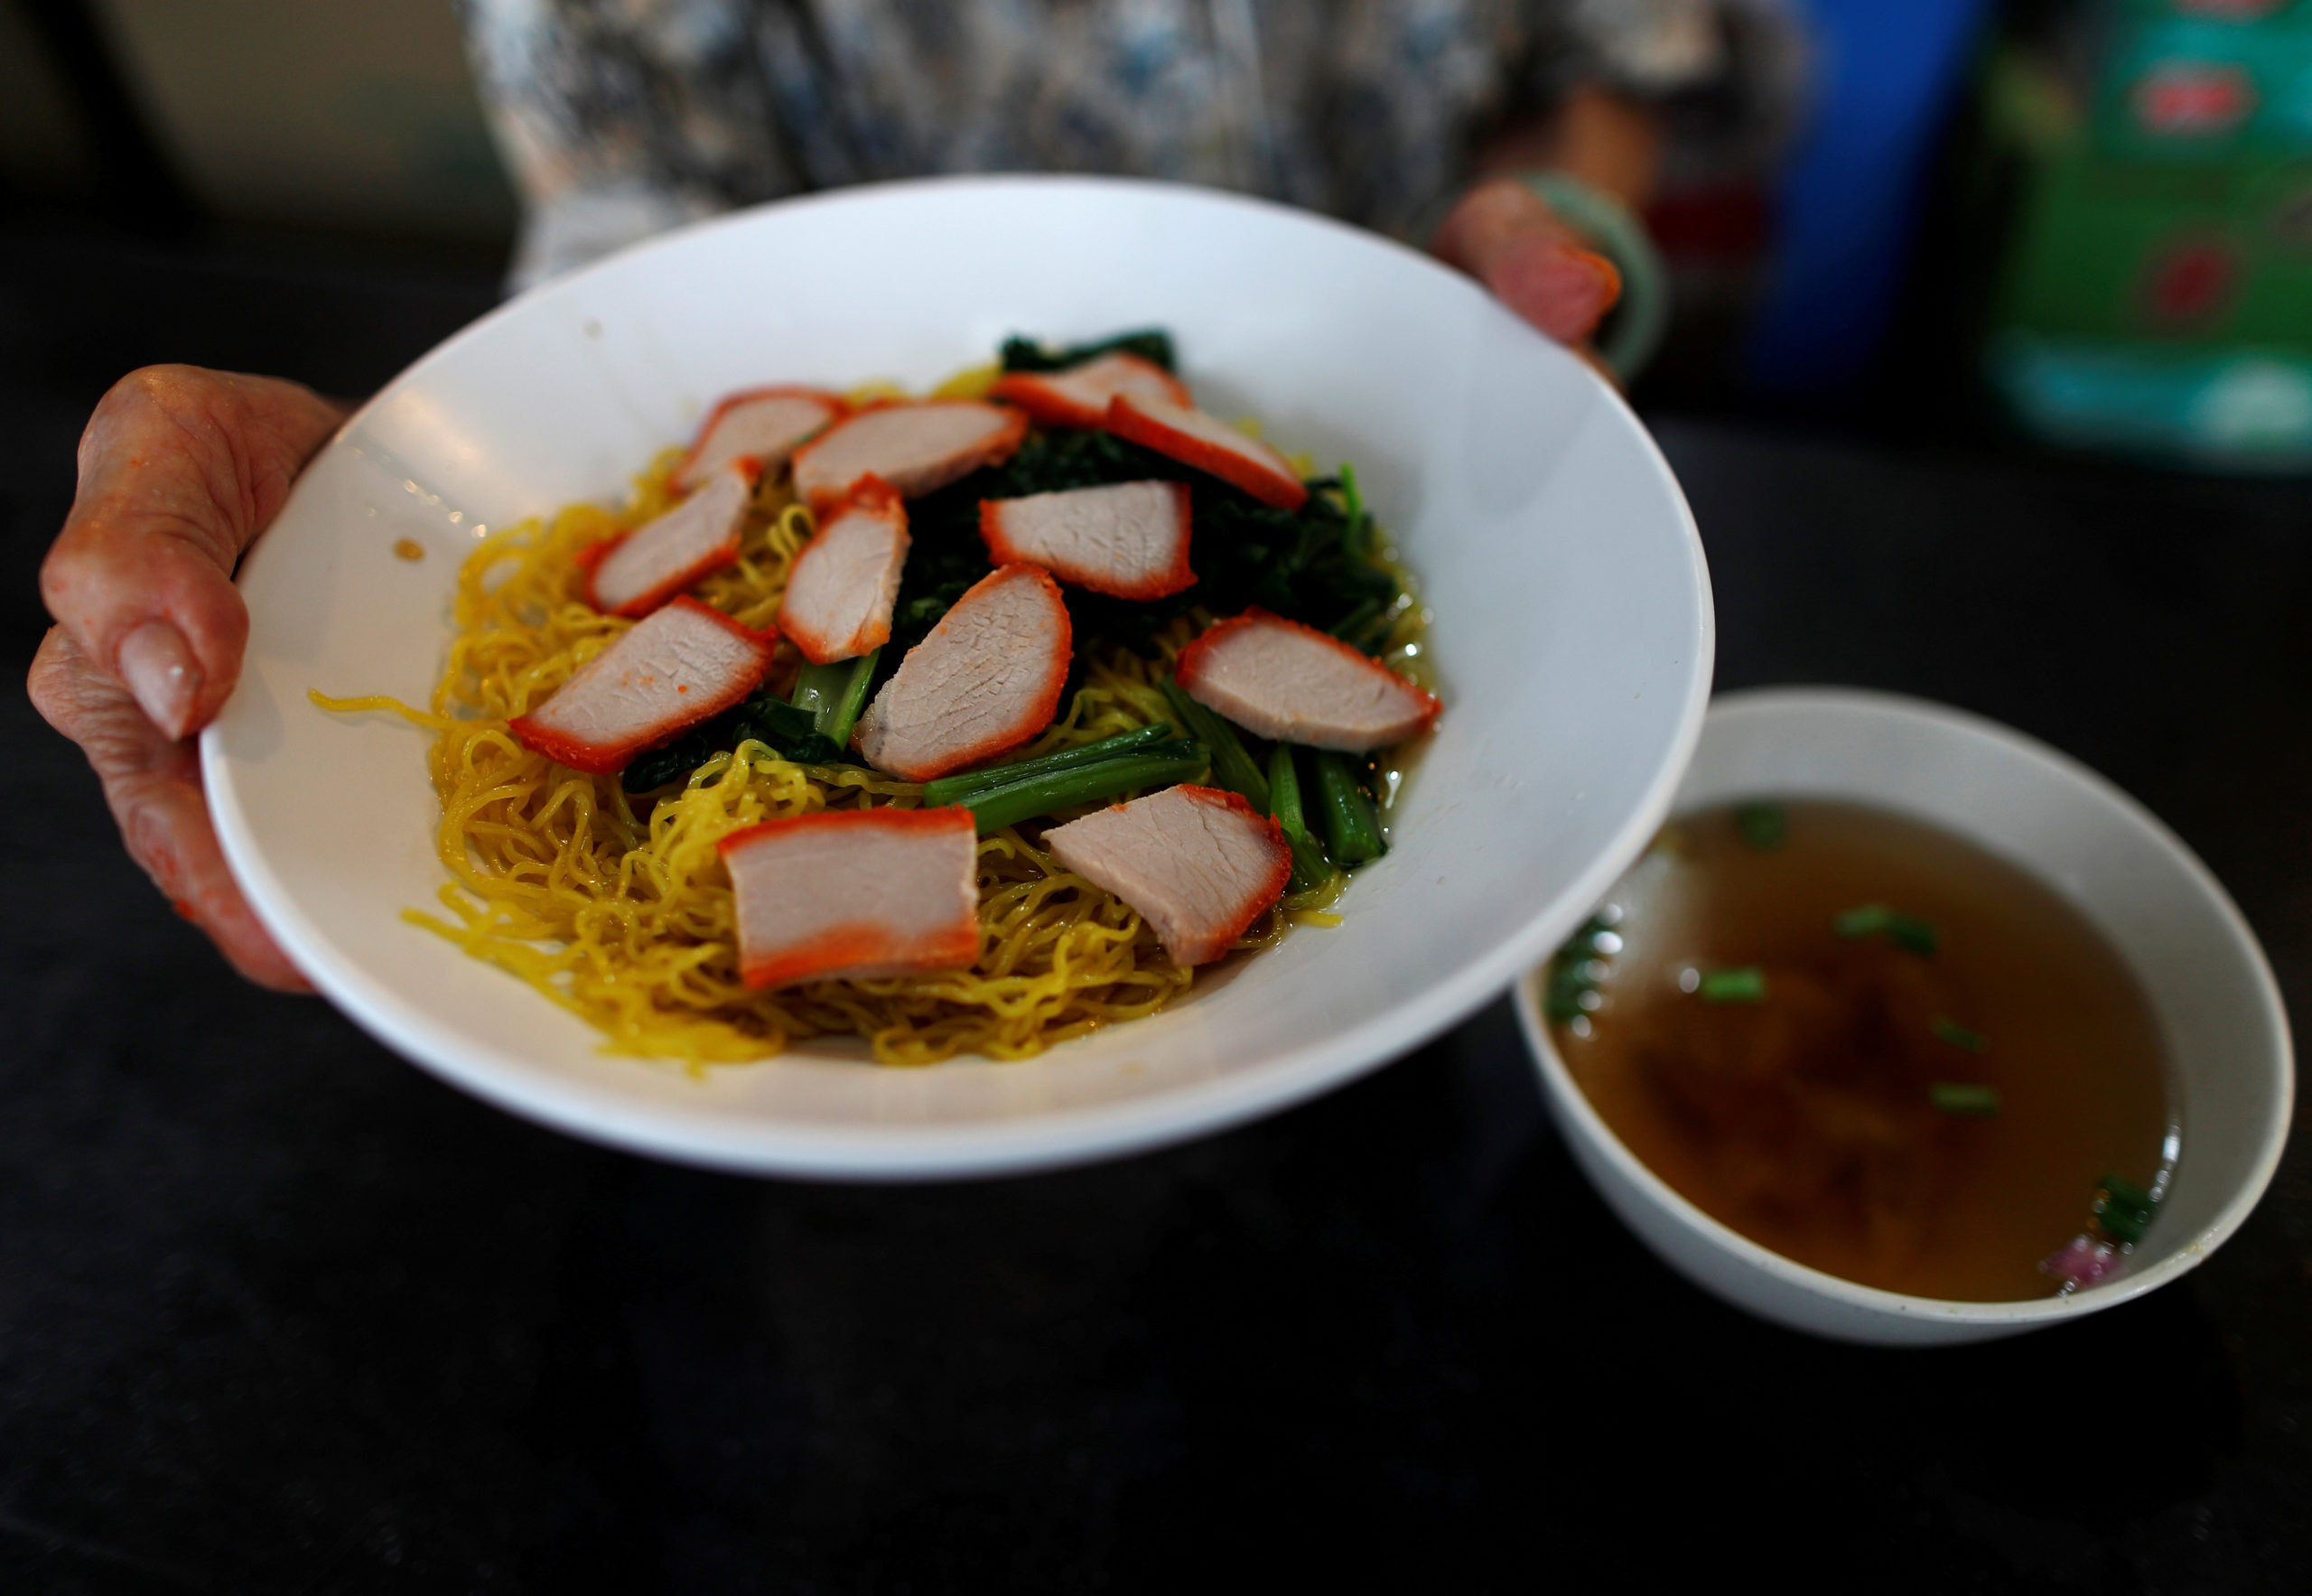 Singapore's foodie 'hawker' culture given UNESCO recognition